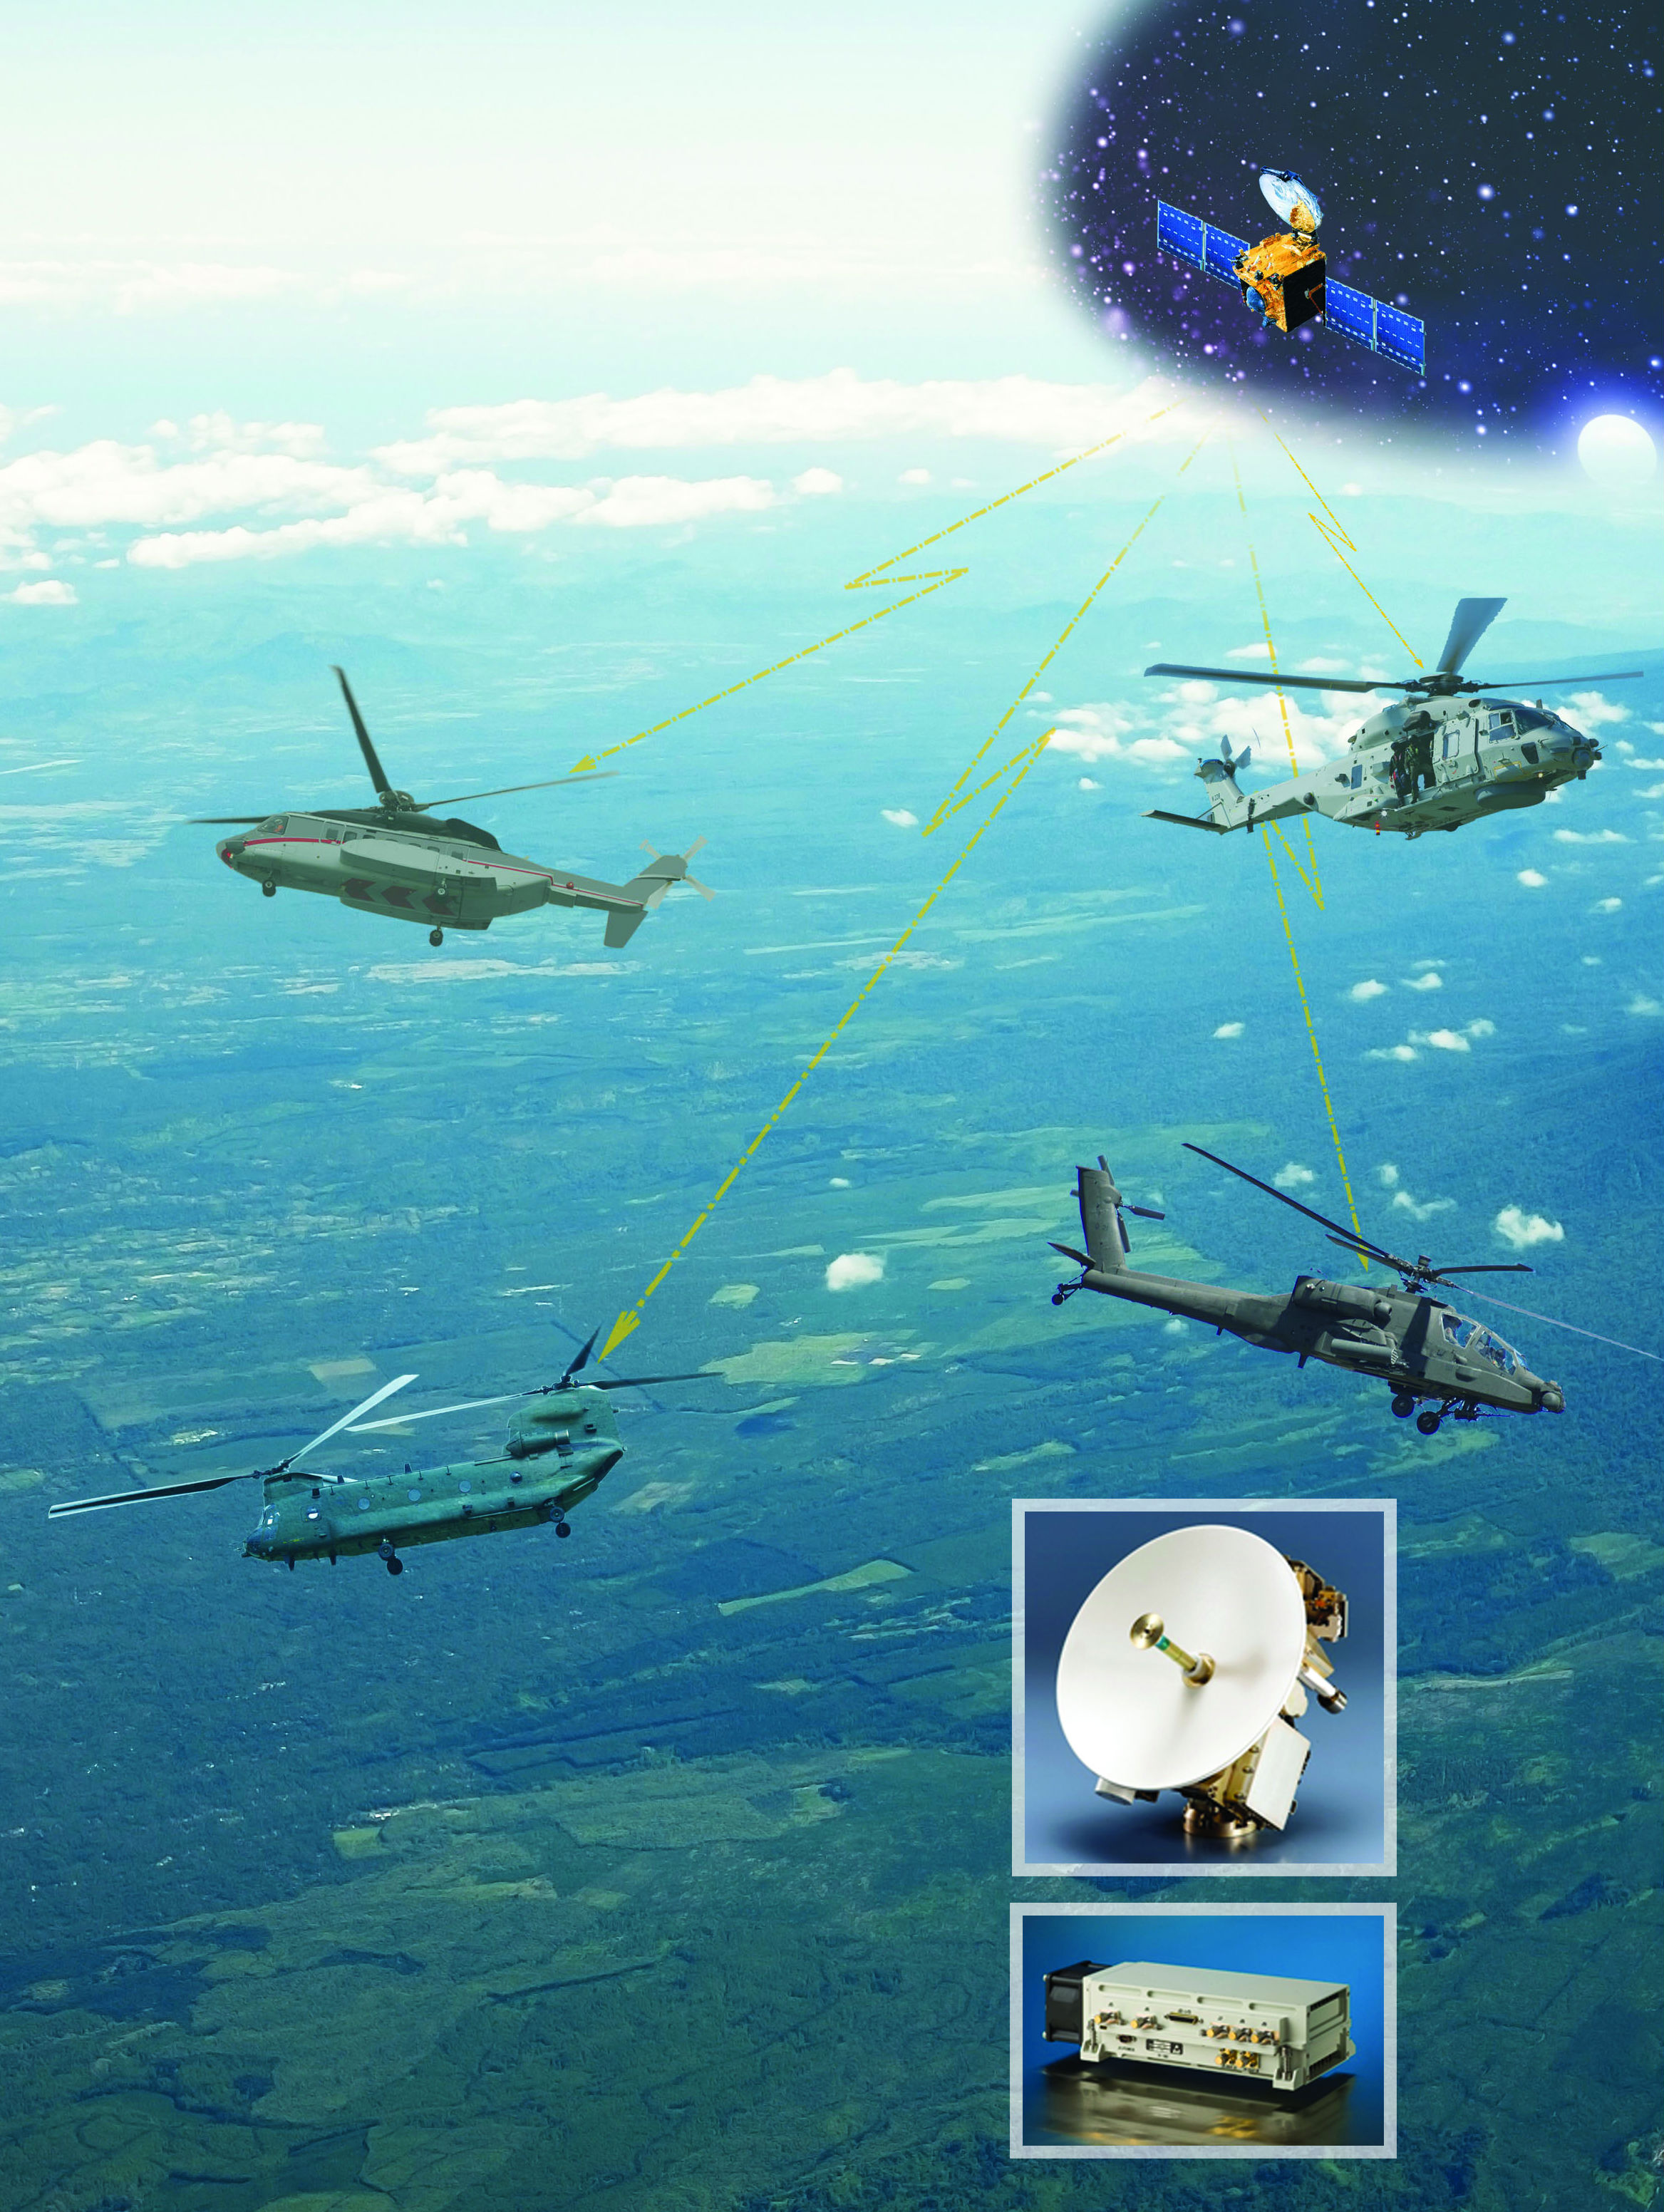 The ELK-1891 Ku-band Satcom network offers high spectral efficiency and low probability of intercept capabilities, as well as relatively minor integration and installation requirements on-board the helicopter. Isreal Aerospace Industries Photo